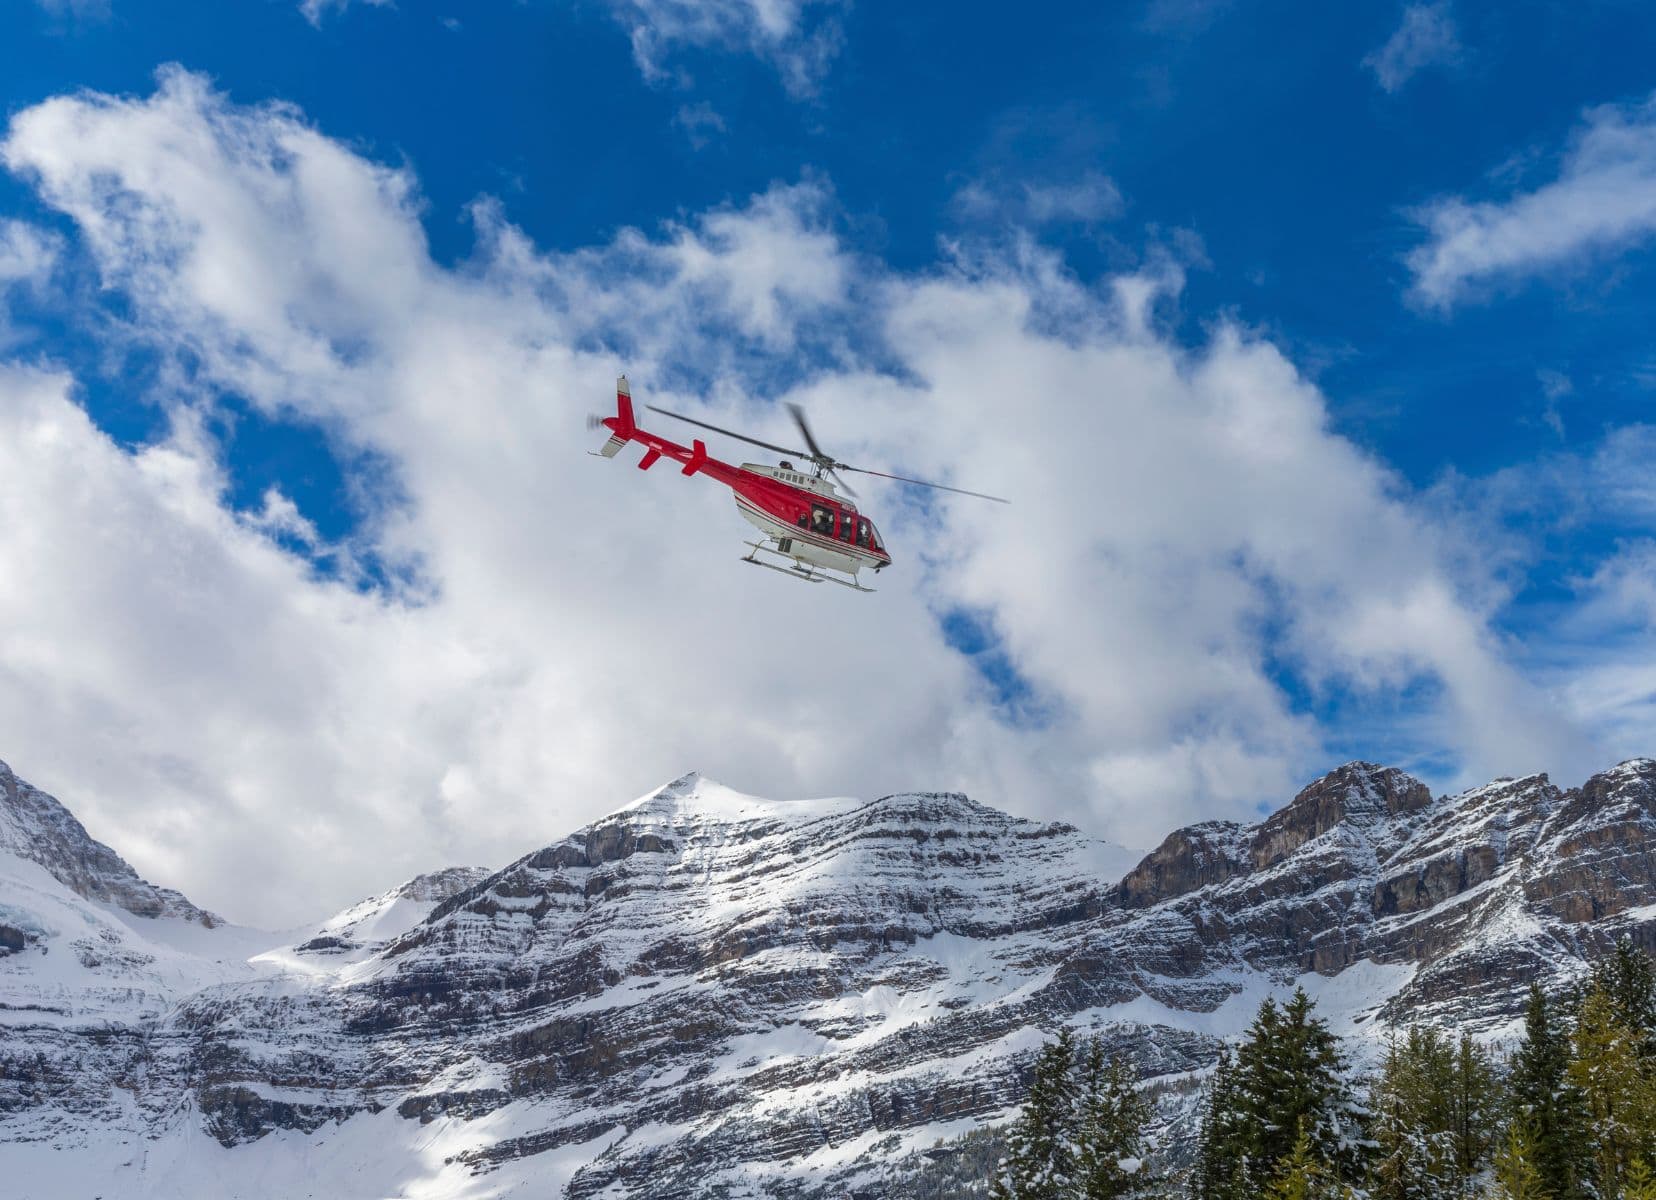 Helicopter in the sky above high mountains